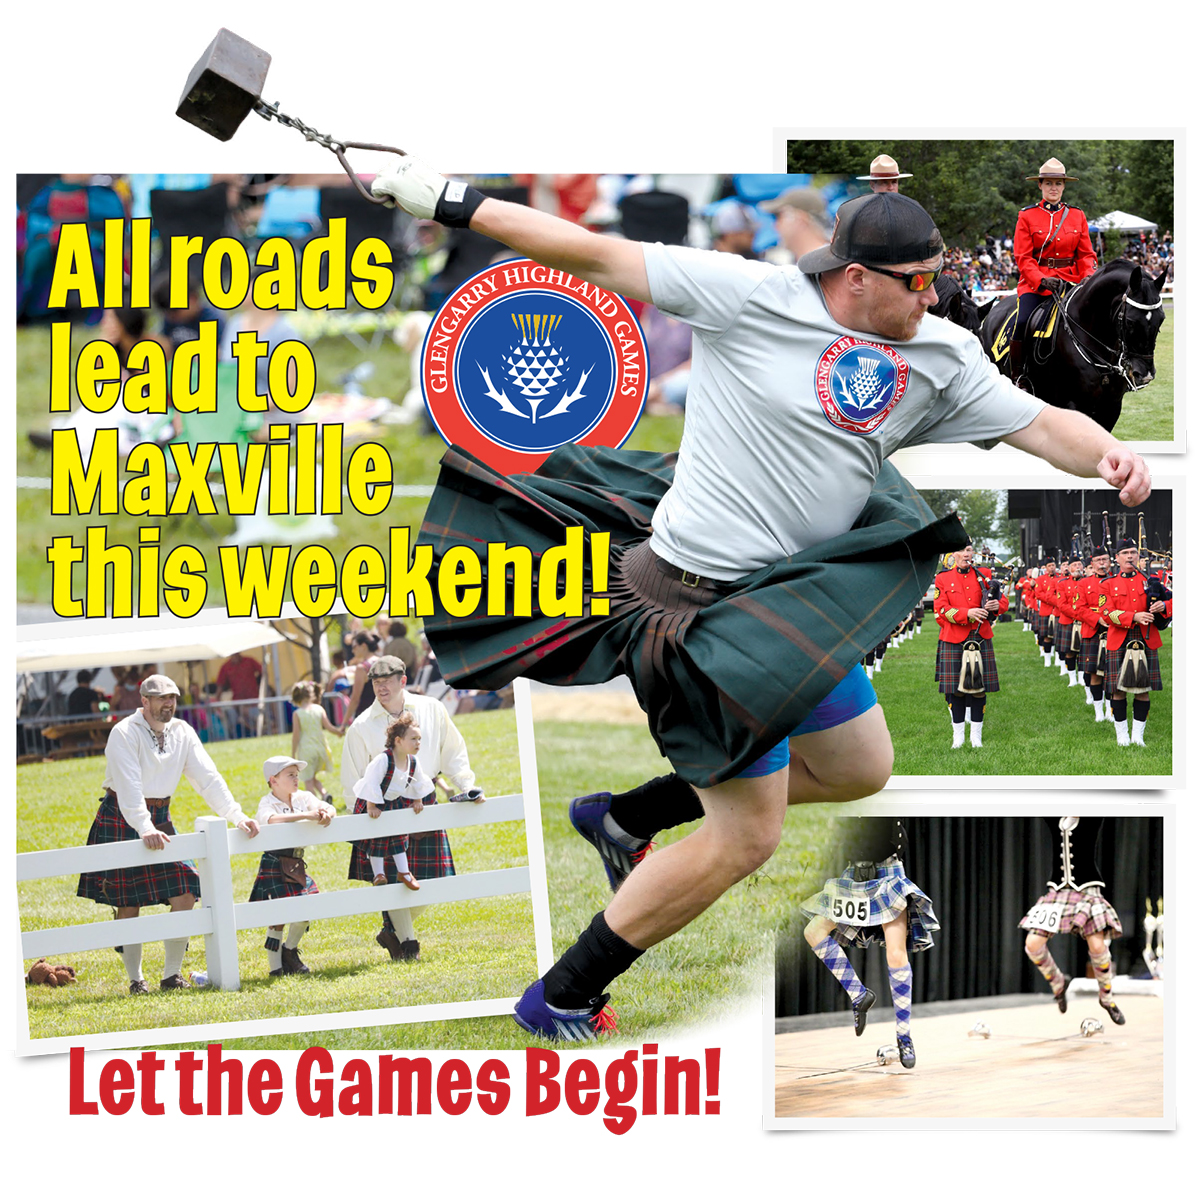 Welcome to the Glengarry Highland Games!